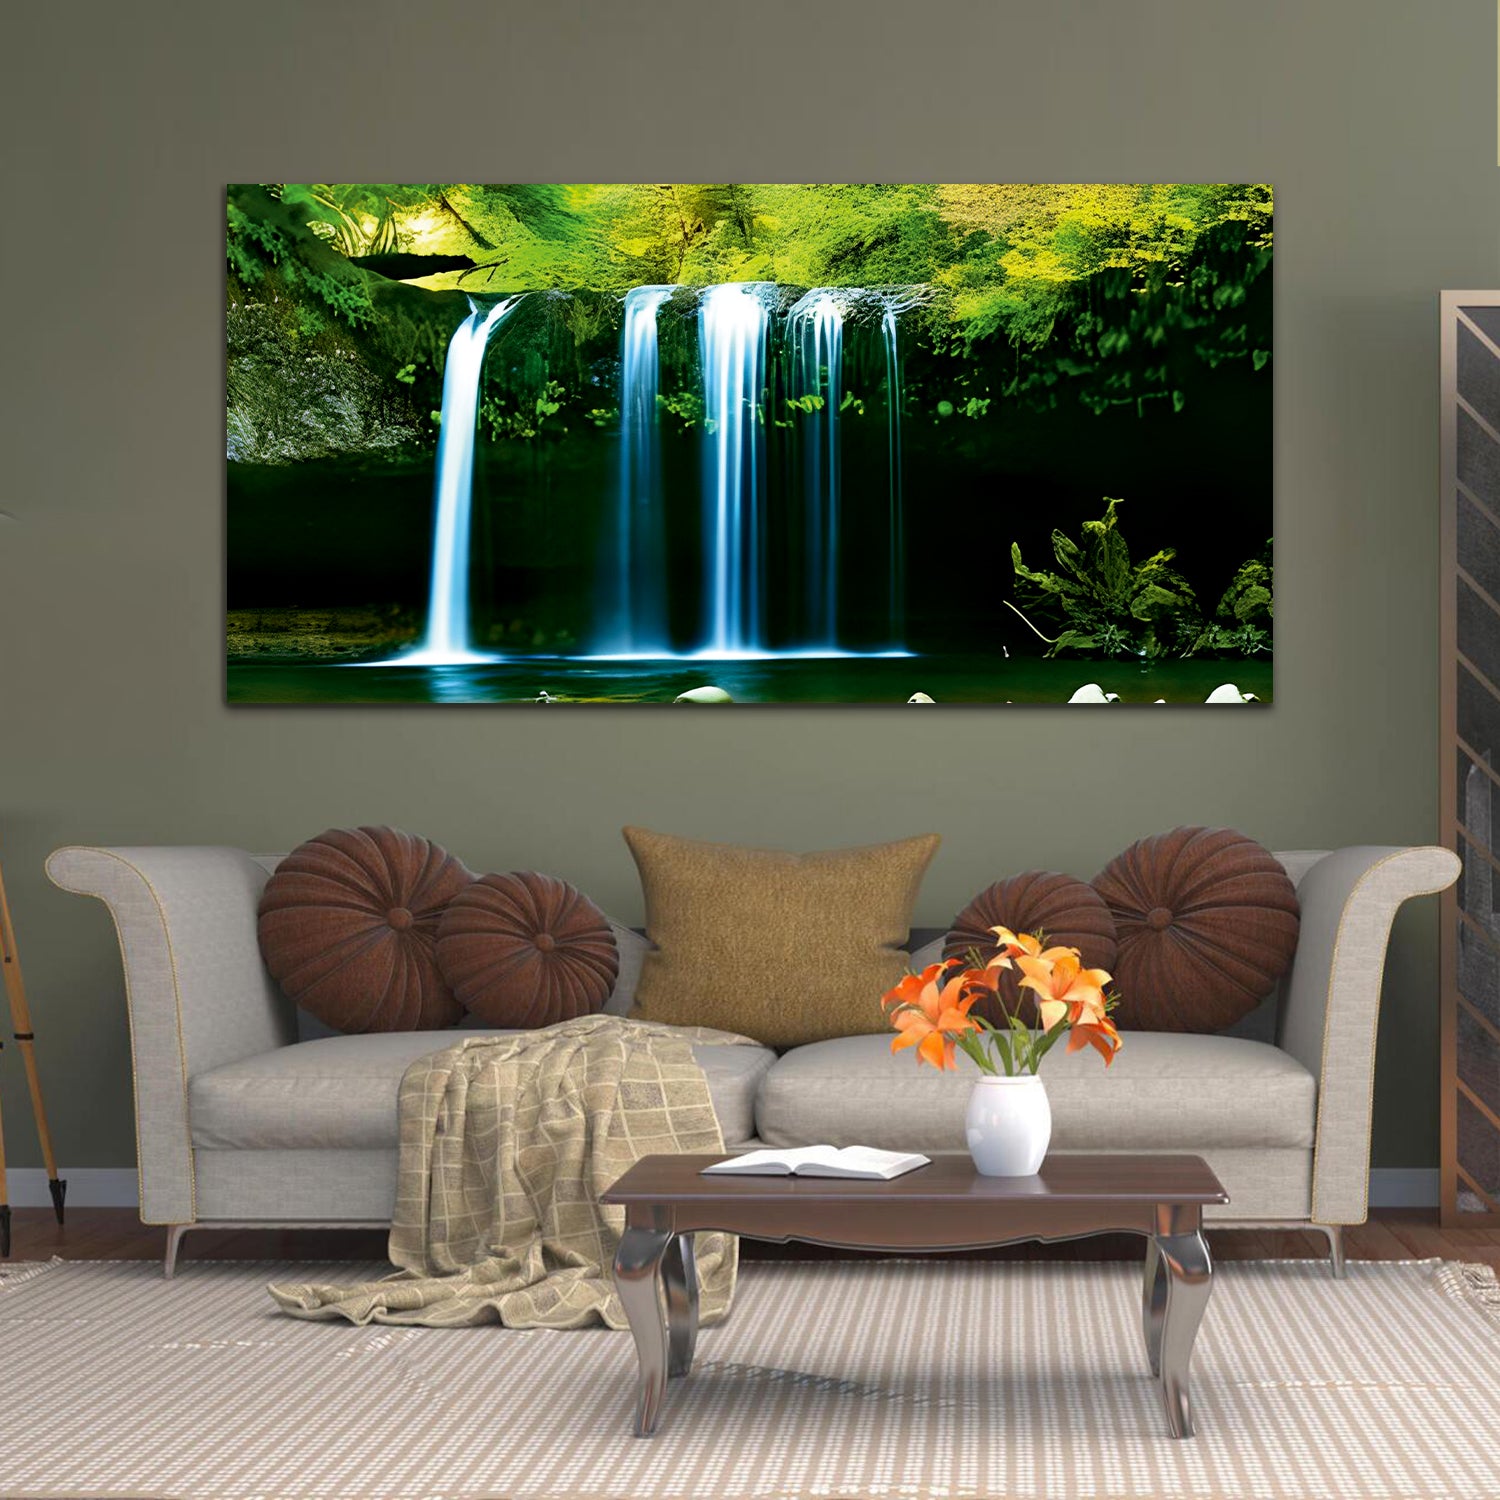 Waterfall Nature Green & Blue Canvas Wall Painting